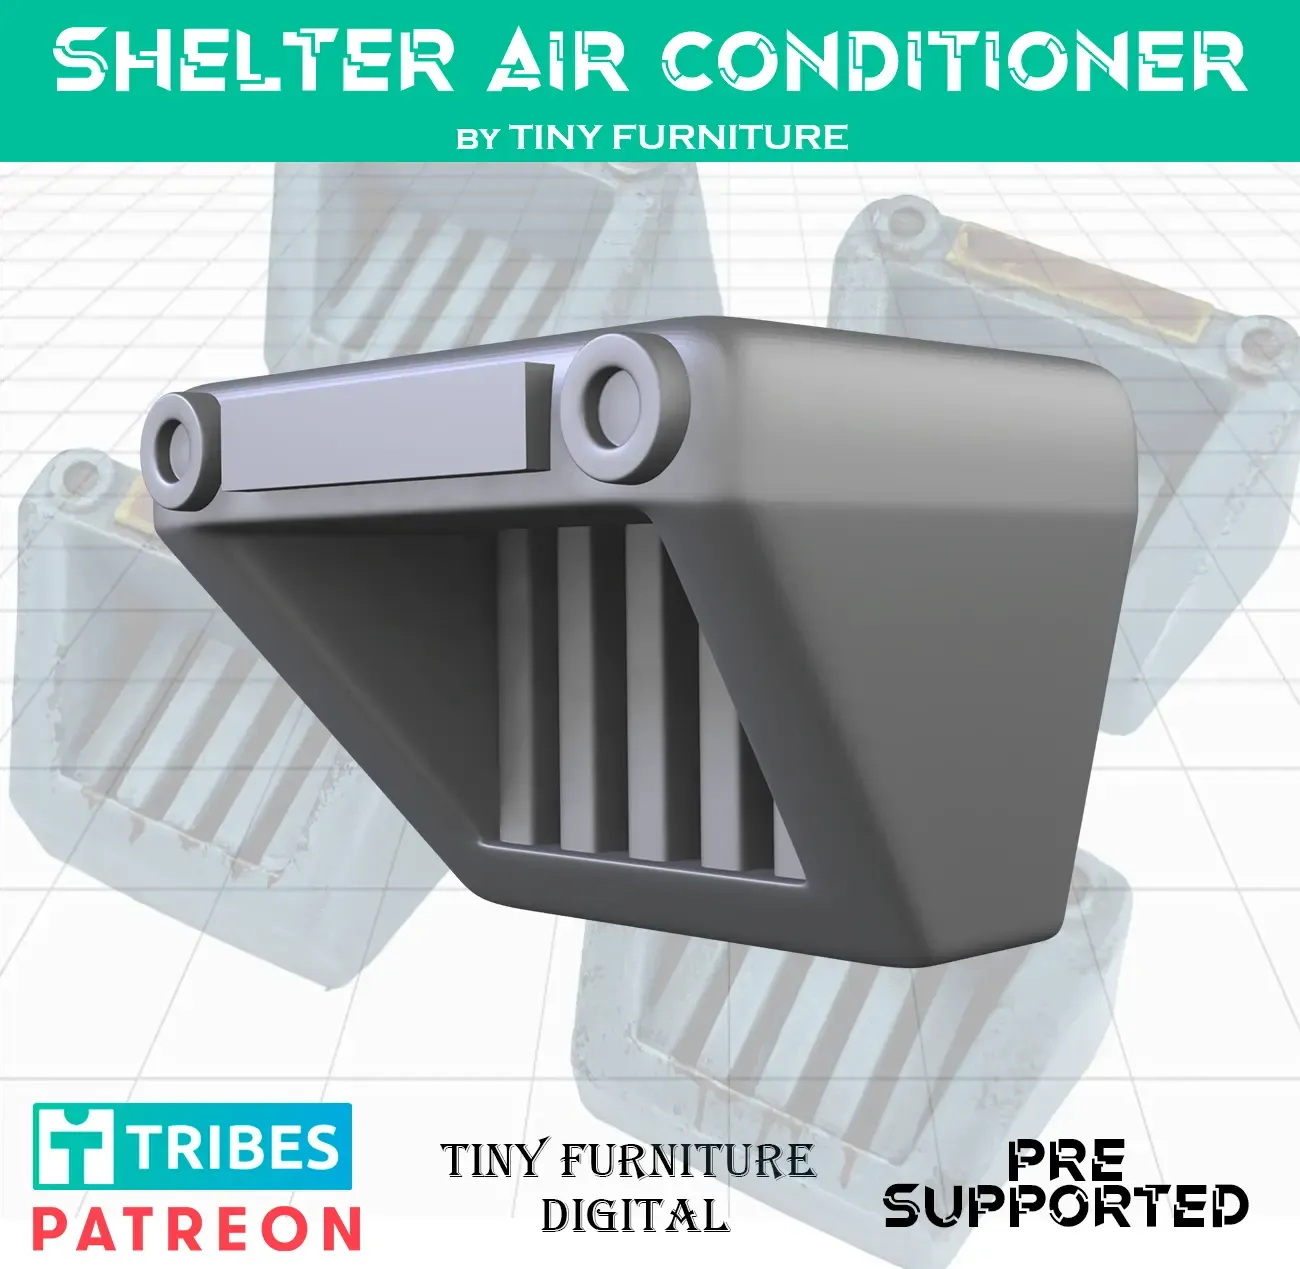 Nuclear shelter air conditioner